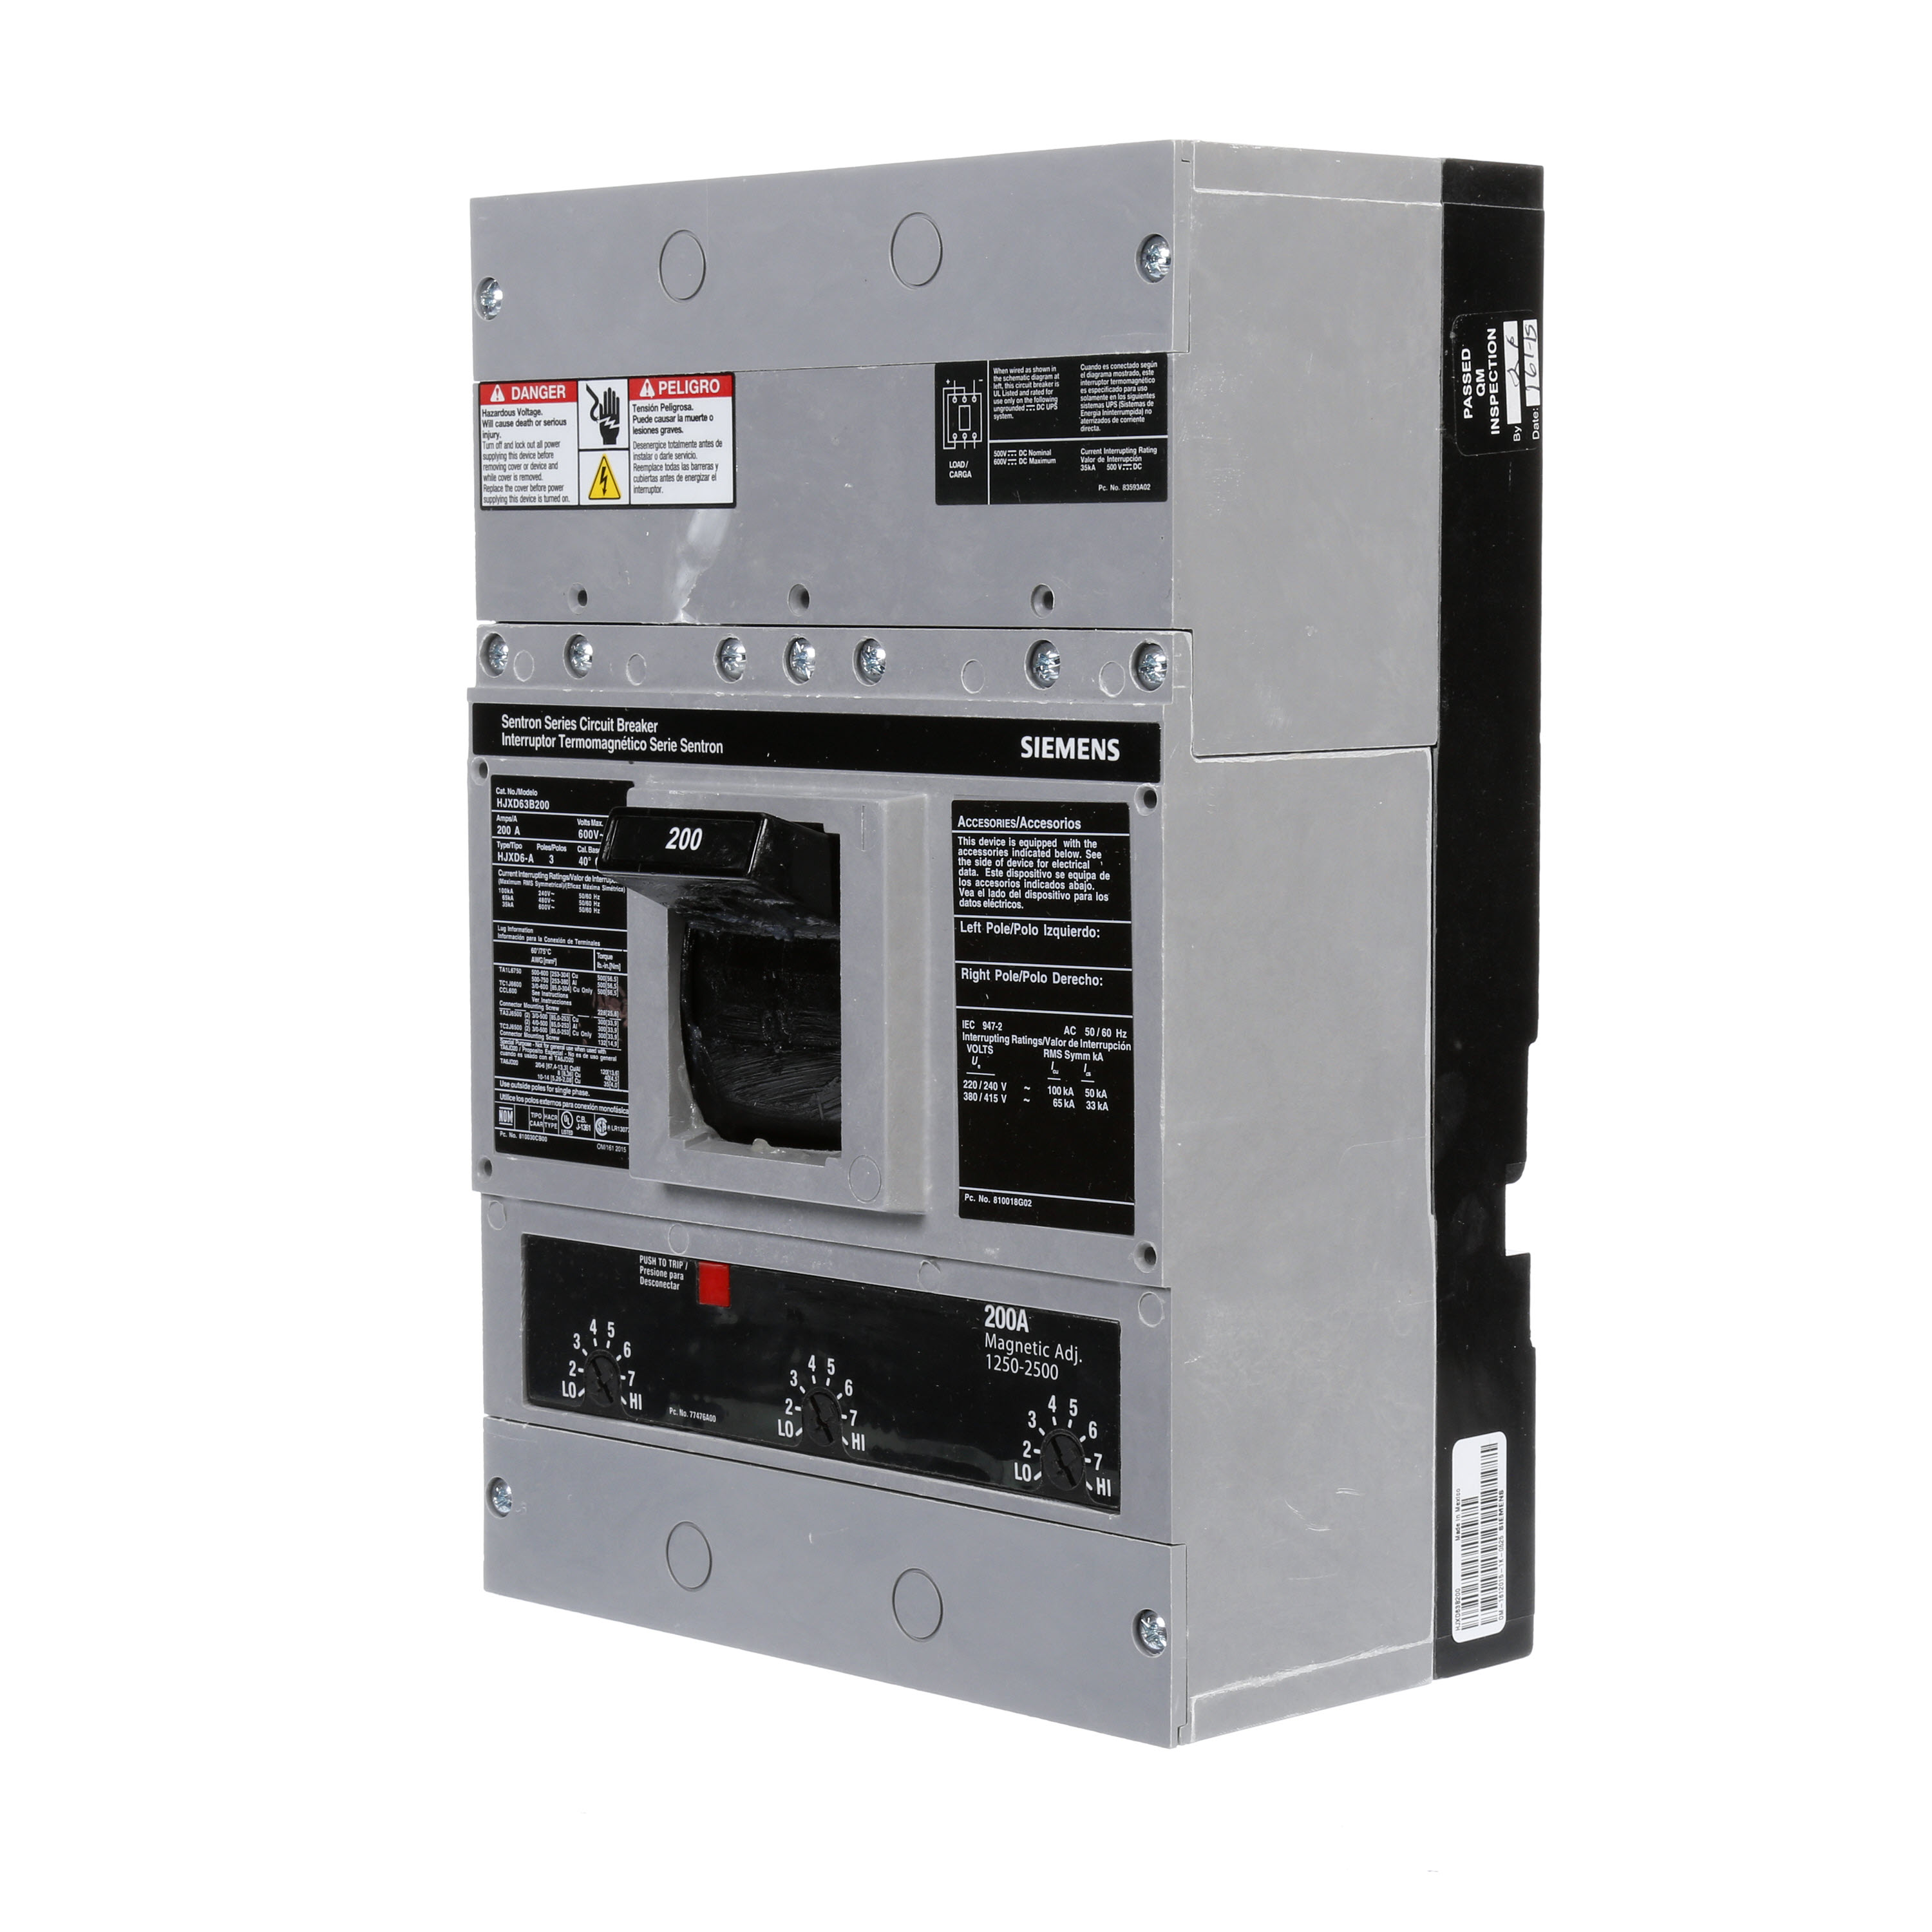 SIEMENS LOW VOLTAGE SENTRON MOLDED CASE CIRCUIT BREAKER WITH THERMAL - MAGNETICTRIP UNIT. ASSEMBLED STANDARD 40 DEG C BREAKER JD FRAME WITH HIGH BREAKING CAPACITY. 200A 3-POLE (35KAIC AT 600V) (65KAIC AT 480V). NON-INTERCHANGEABLE TRIP UNIT. SPECIAL FEATURES NO LUGS INSTALLED. DIMENSIONS (W x H x D) IN 7.50 x 11.0 x 4.00.